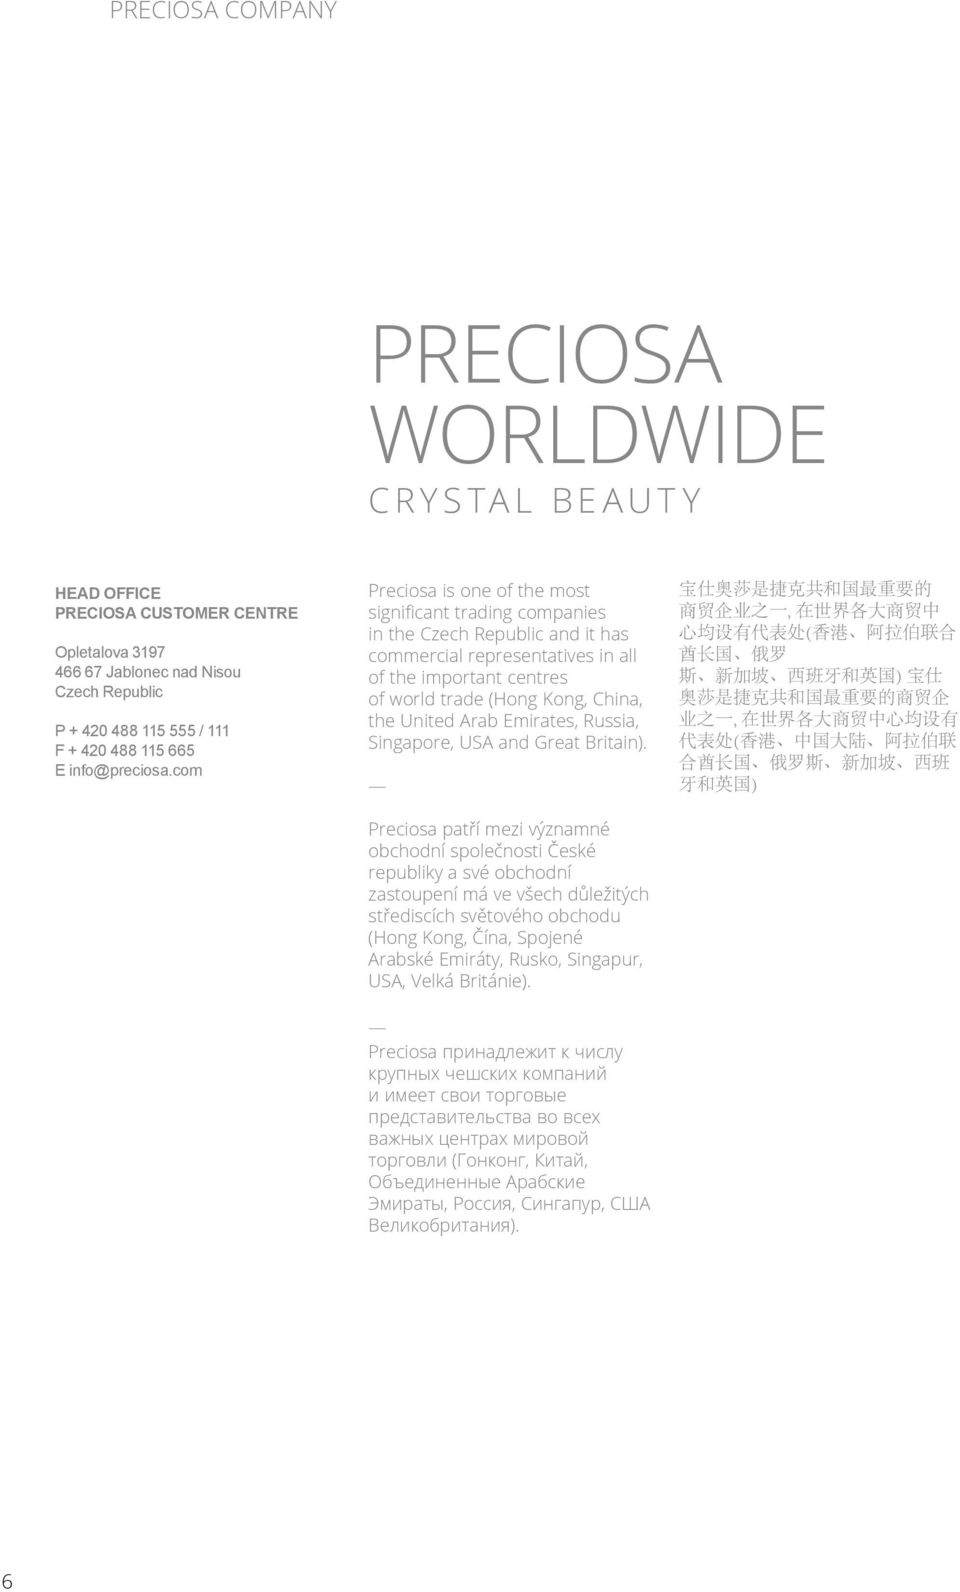 com Preciosa is one of the most significant trading companies in the Czech Republic and it has commercial representatives in all of the important centres of world trade (Hong Kong, China, the United